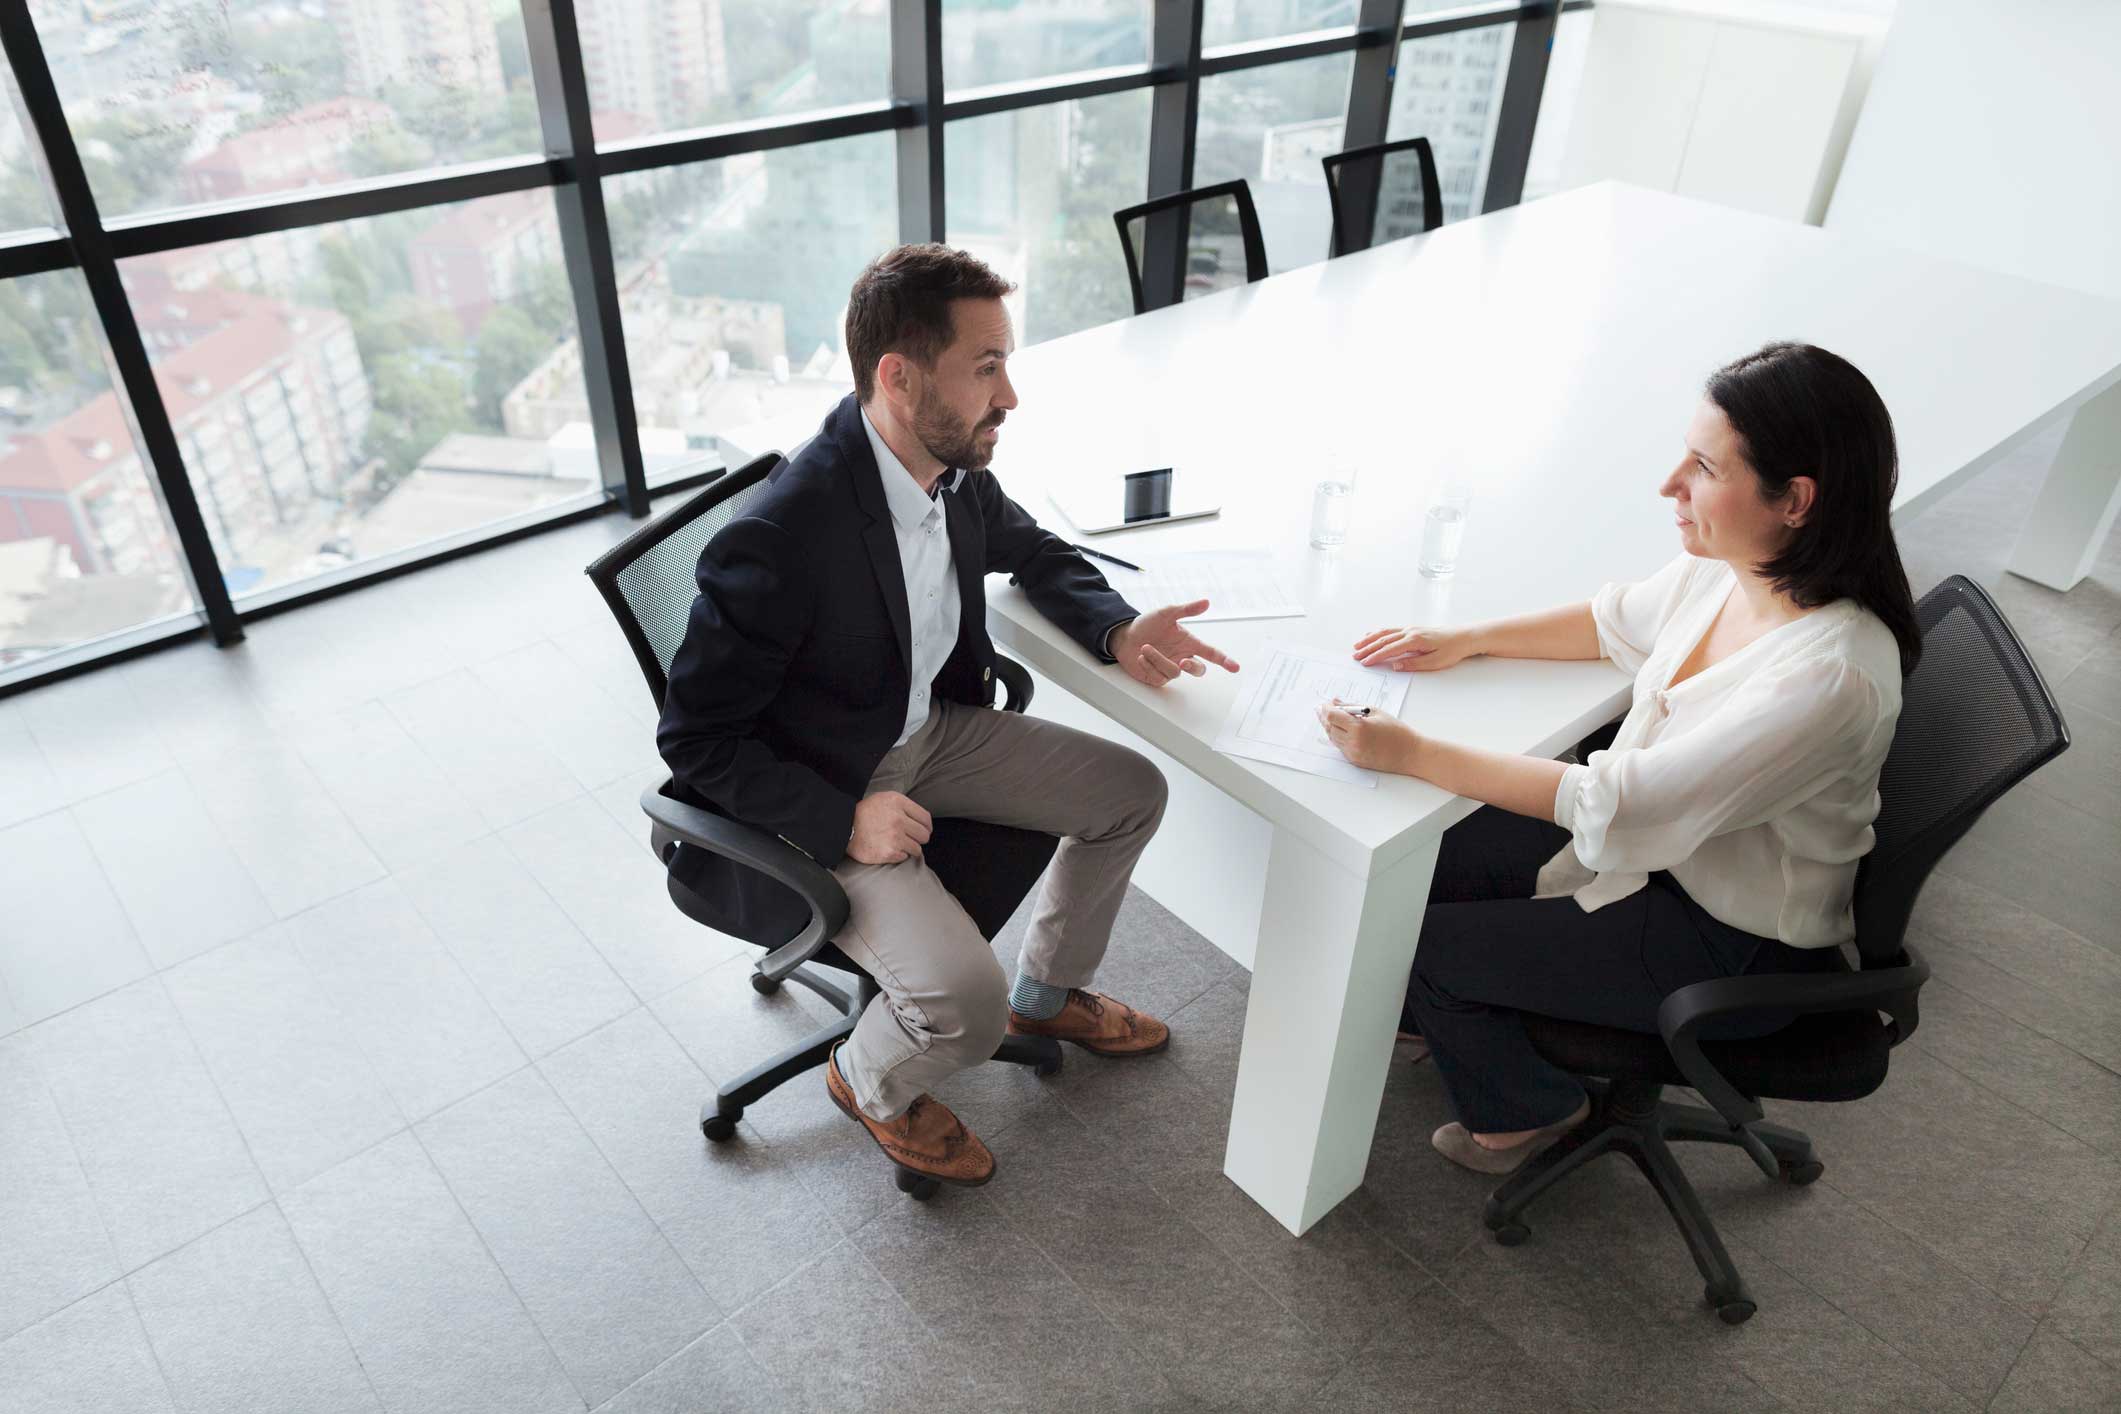 5 Common Interview Questions and How to Answer Them